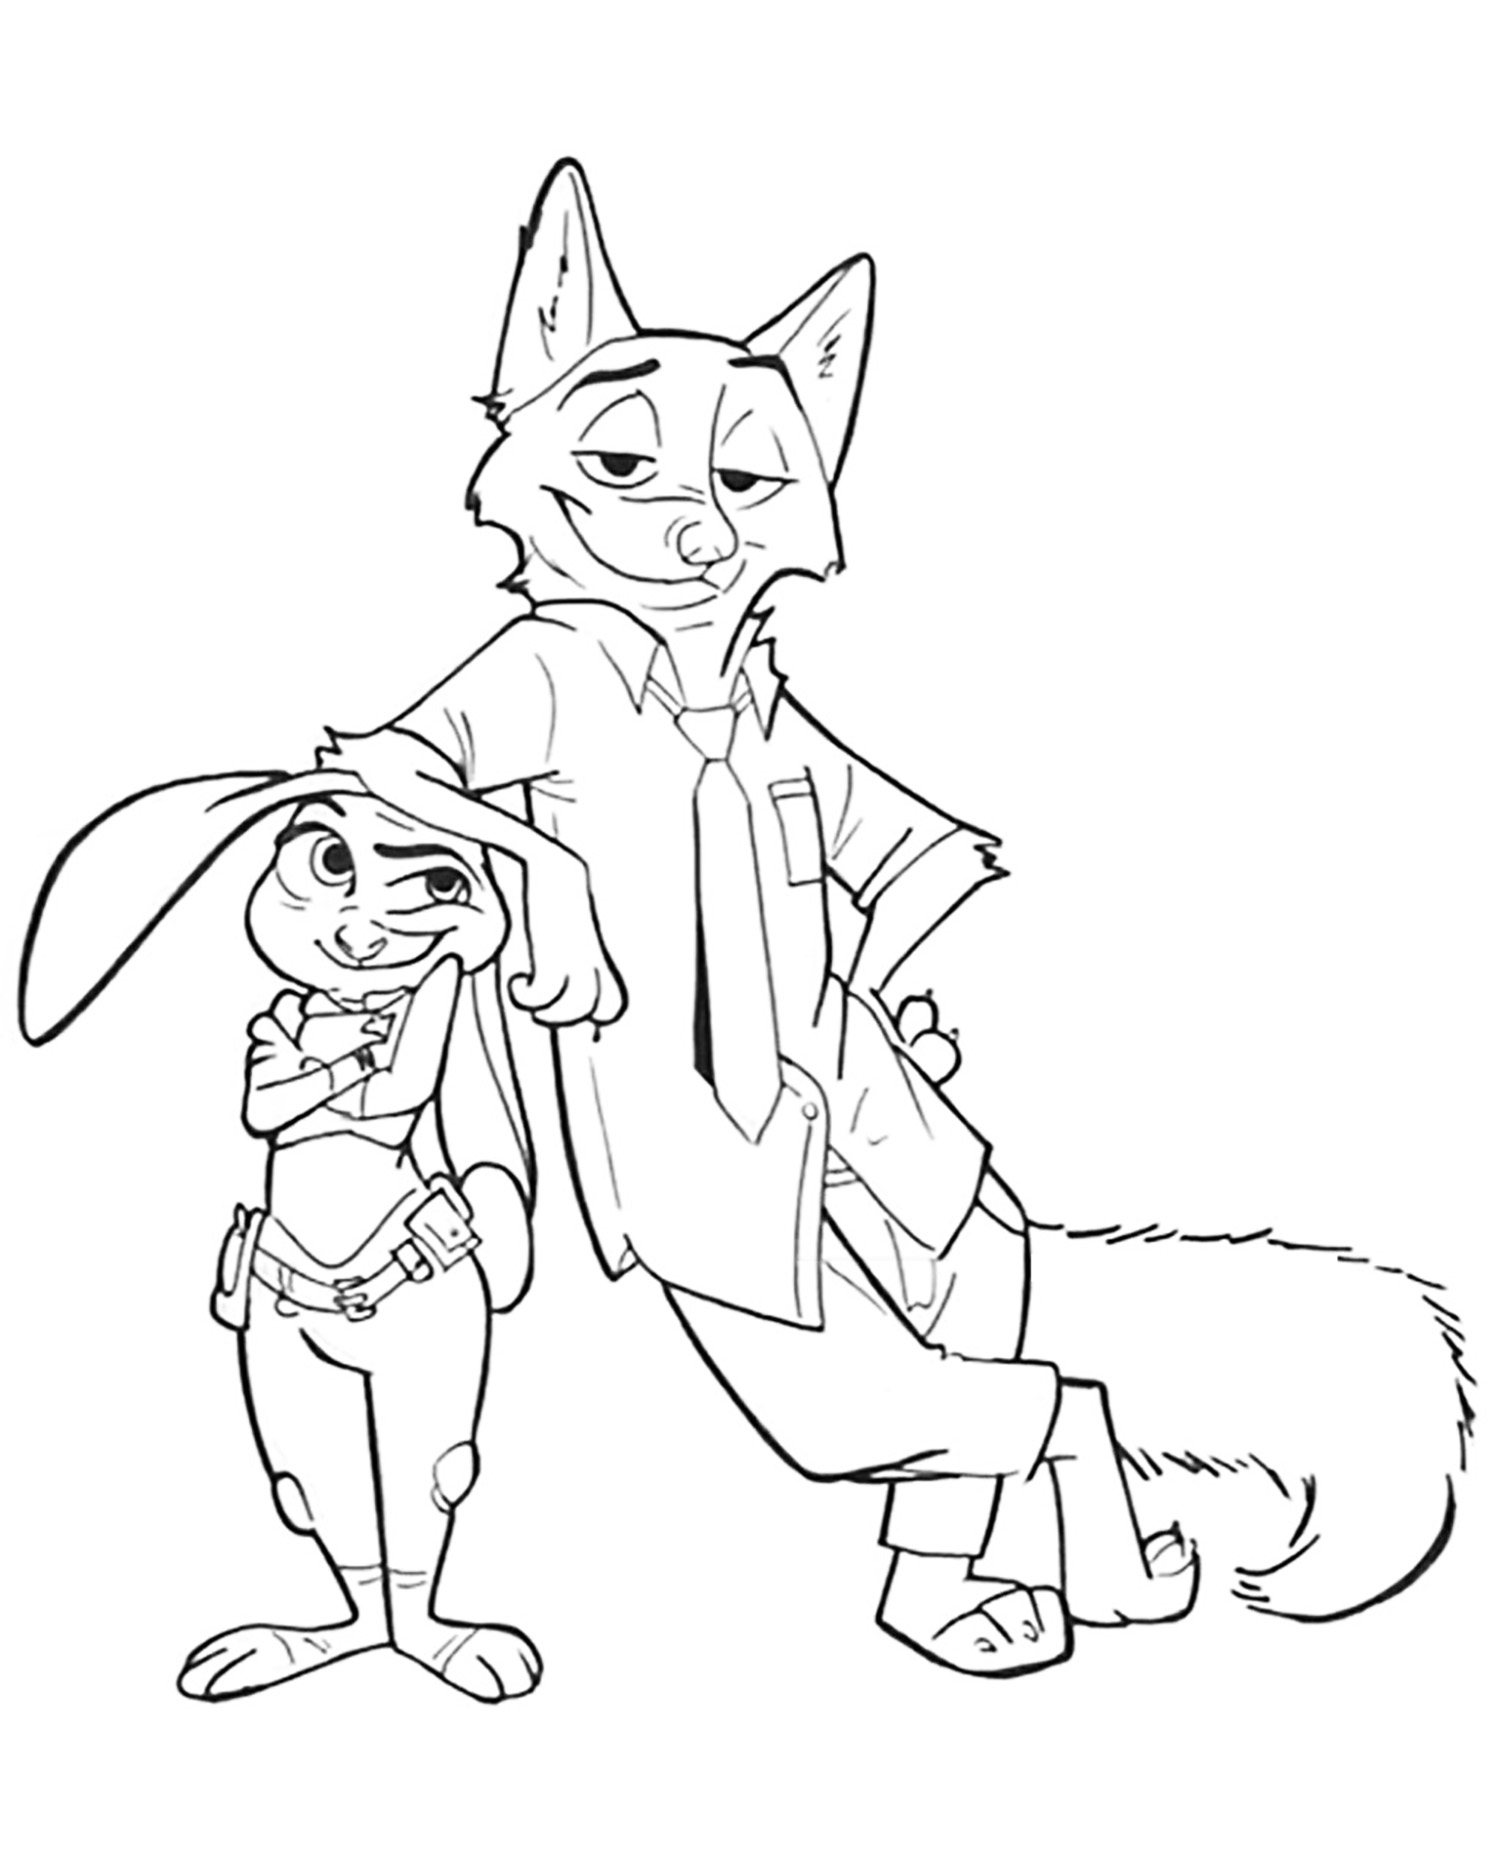 Zootopia coloring page to download for free : Lt. Judy Hopps and Nick Wilde